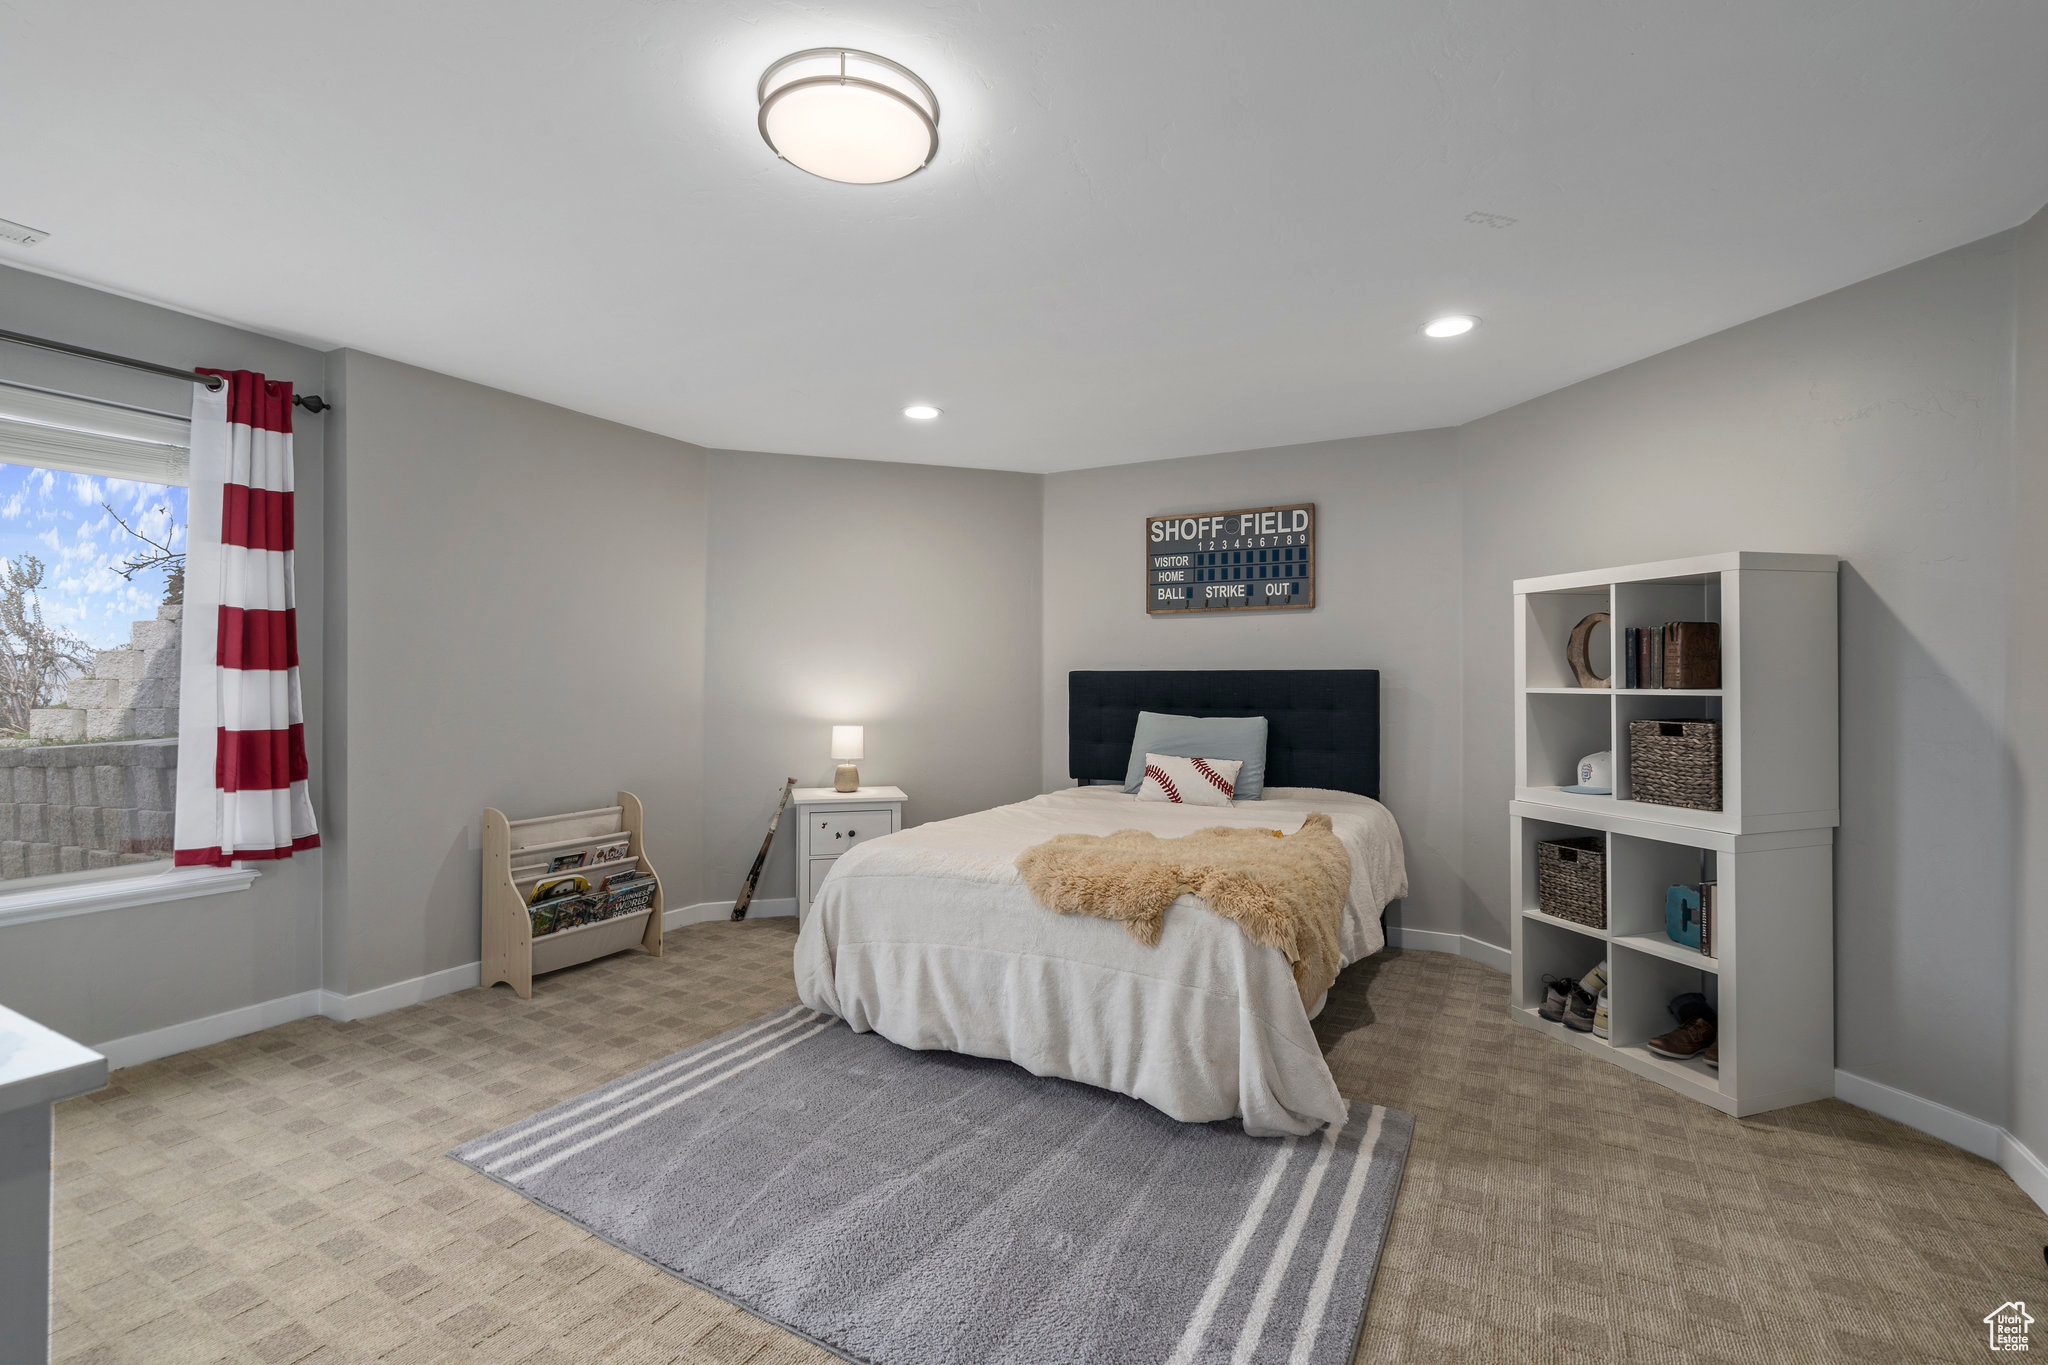 Huge basement bedroom featuring light carpet and above ground windows